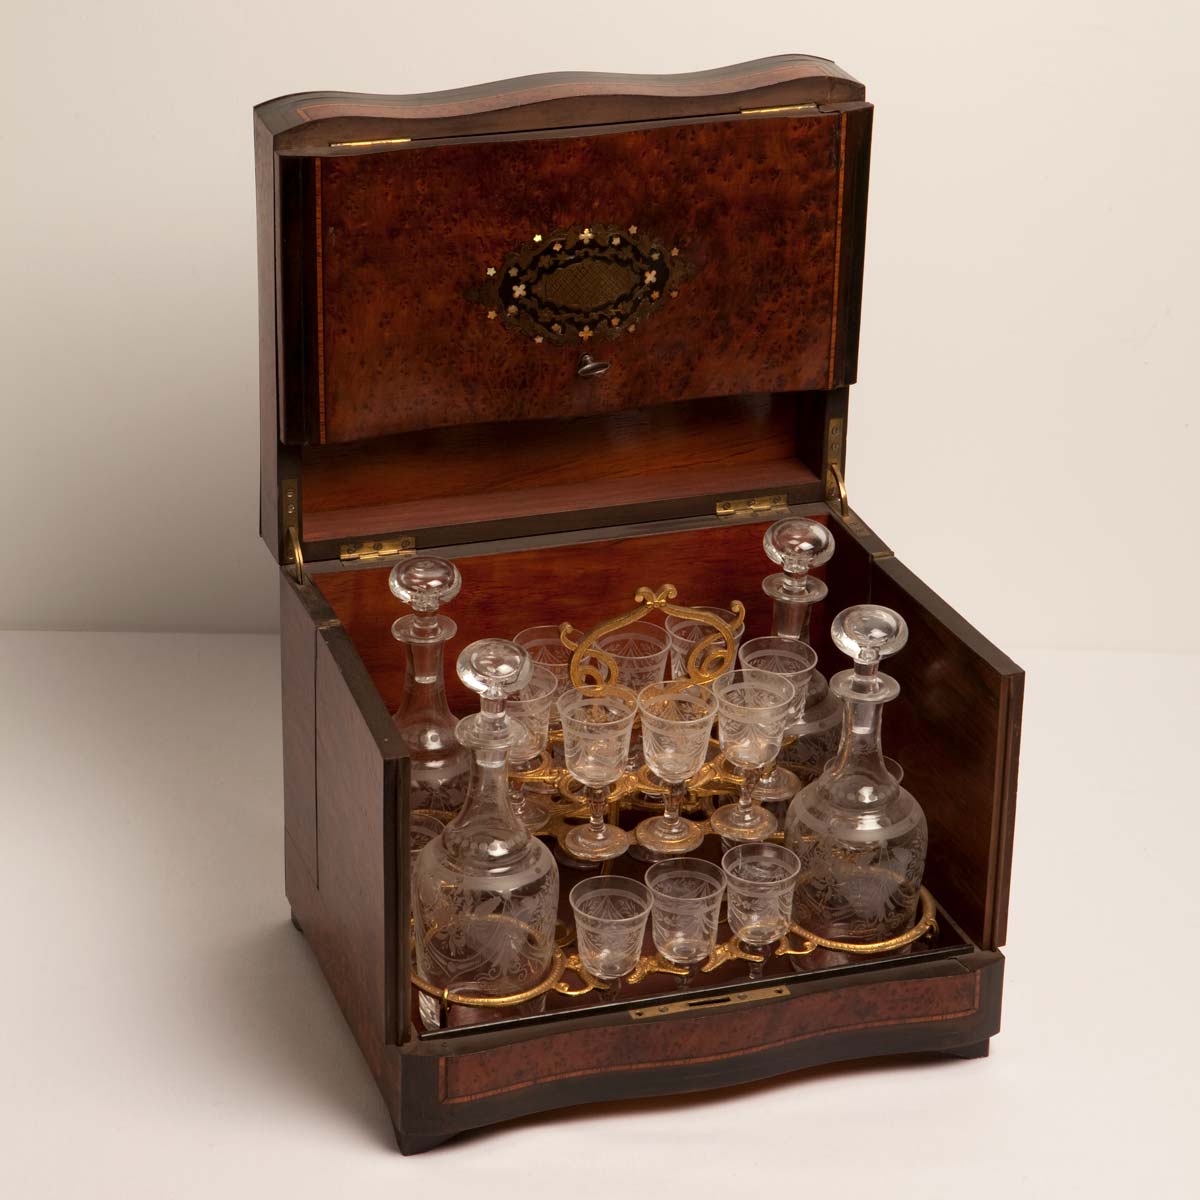 French liqueur glasses in a wooden box, 1800s. Photo: Saara Salmi